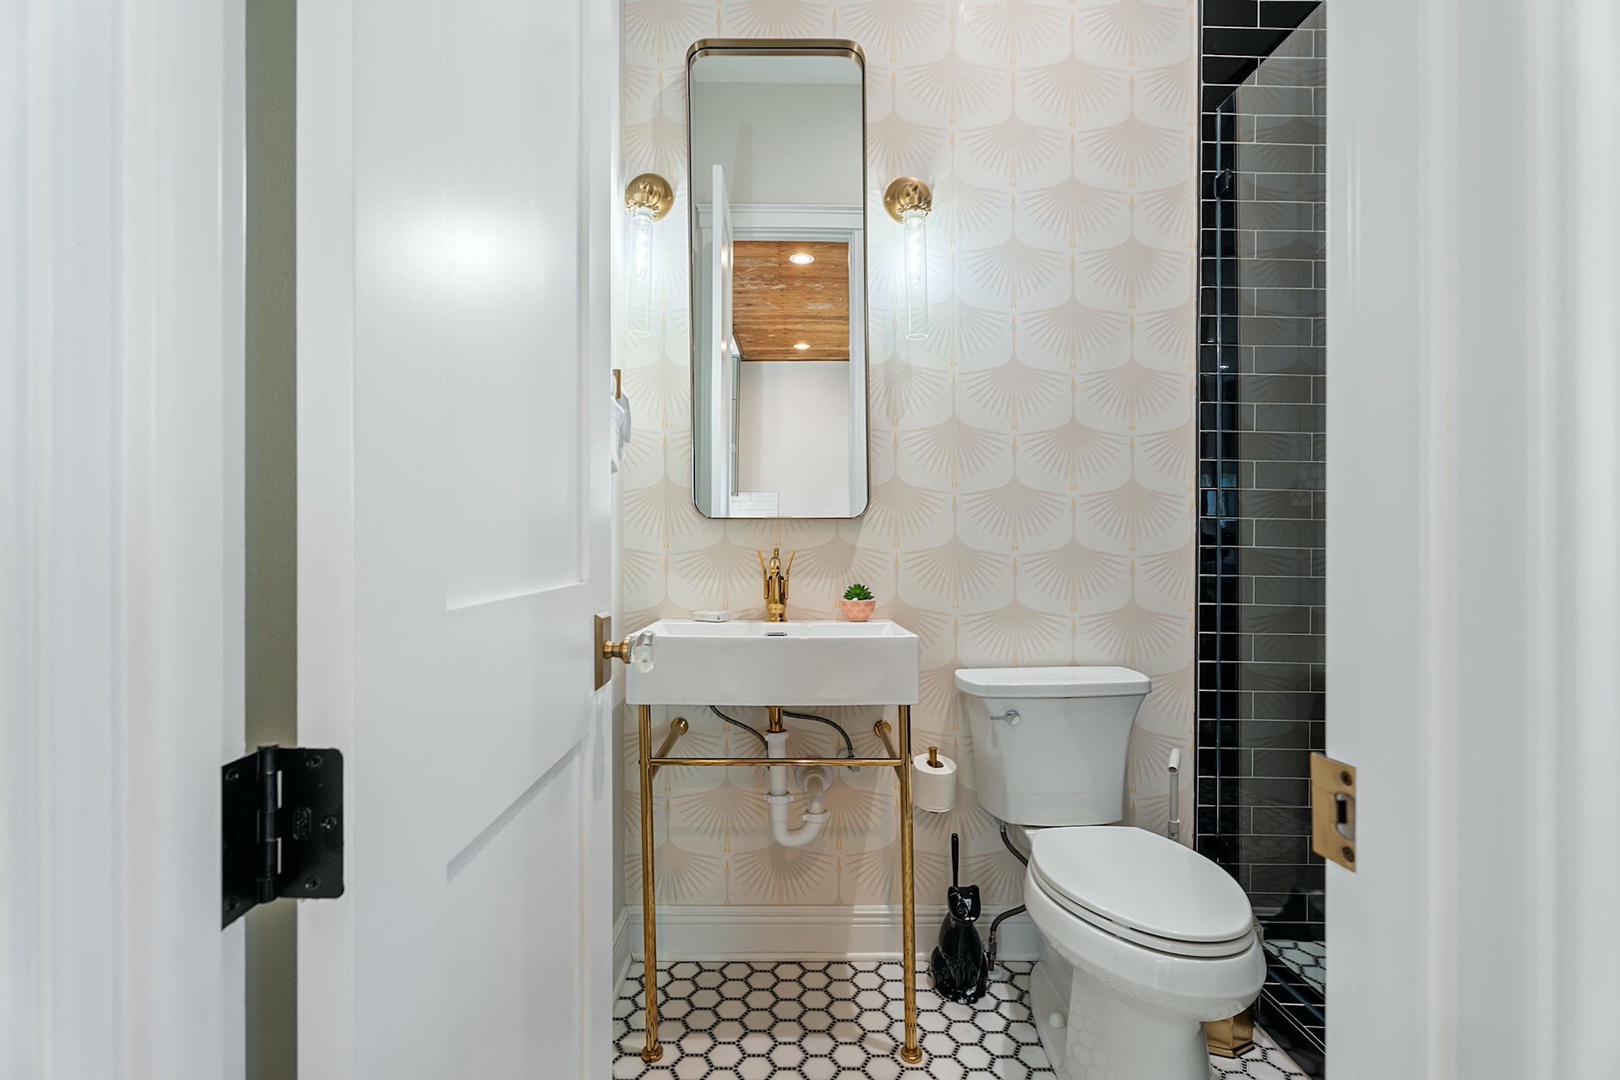 This full bathroom contains a pedestal sink & glass walk-in shower